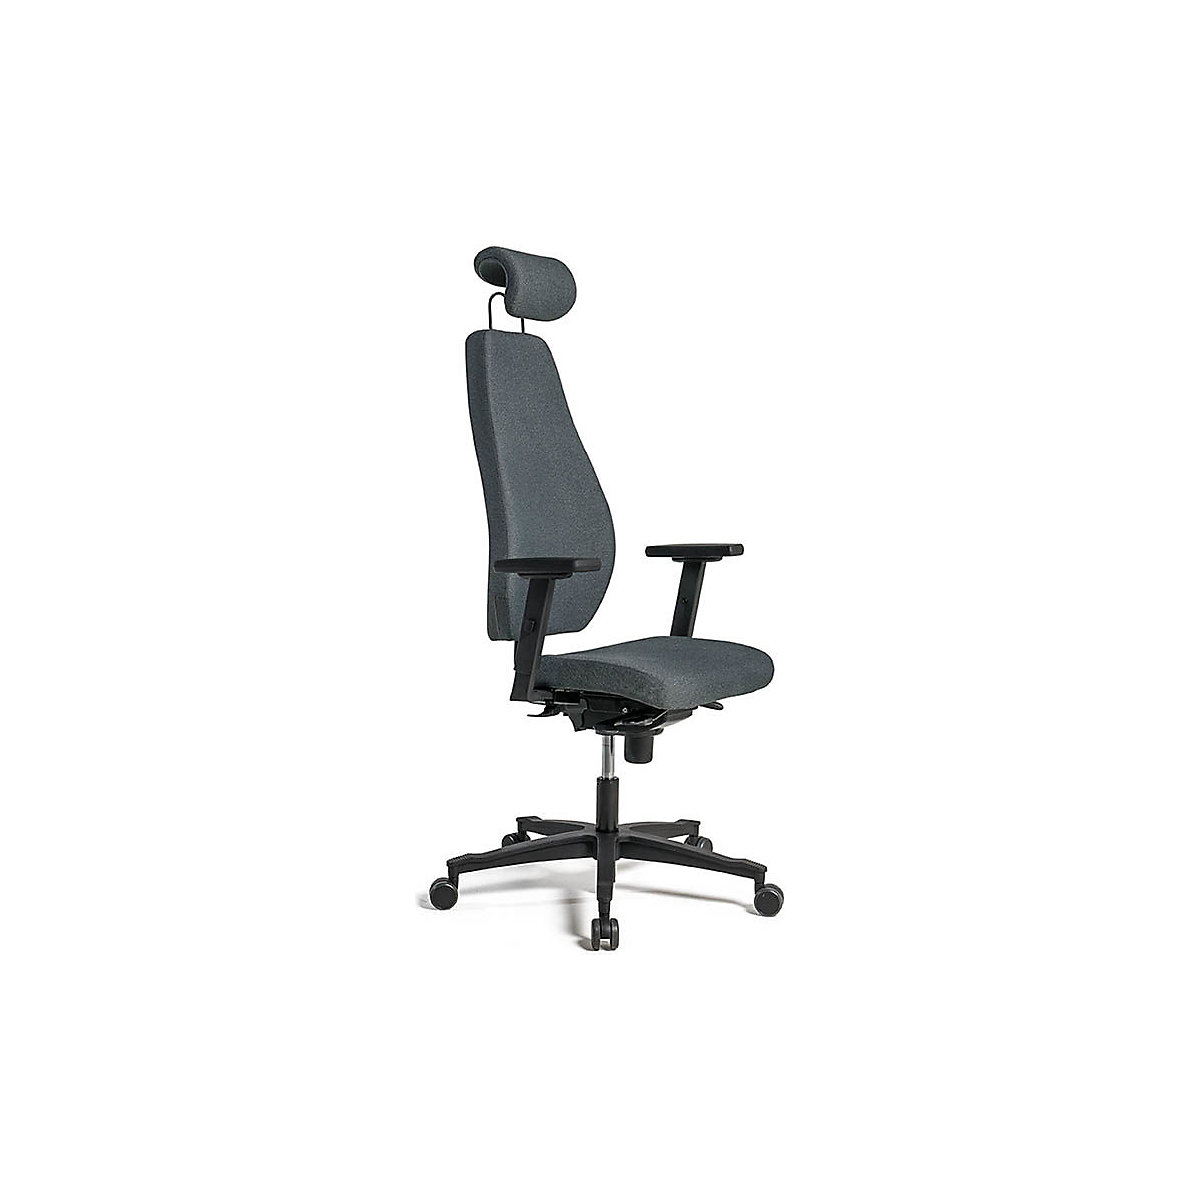 Office swivel chair, synchronous mechanism